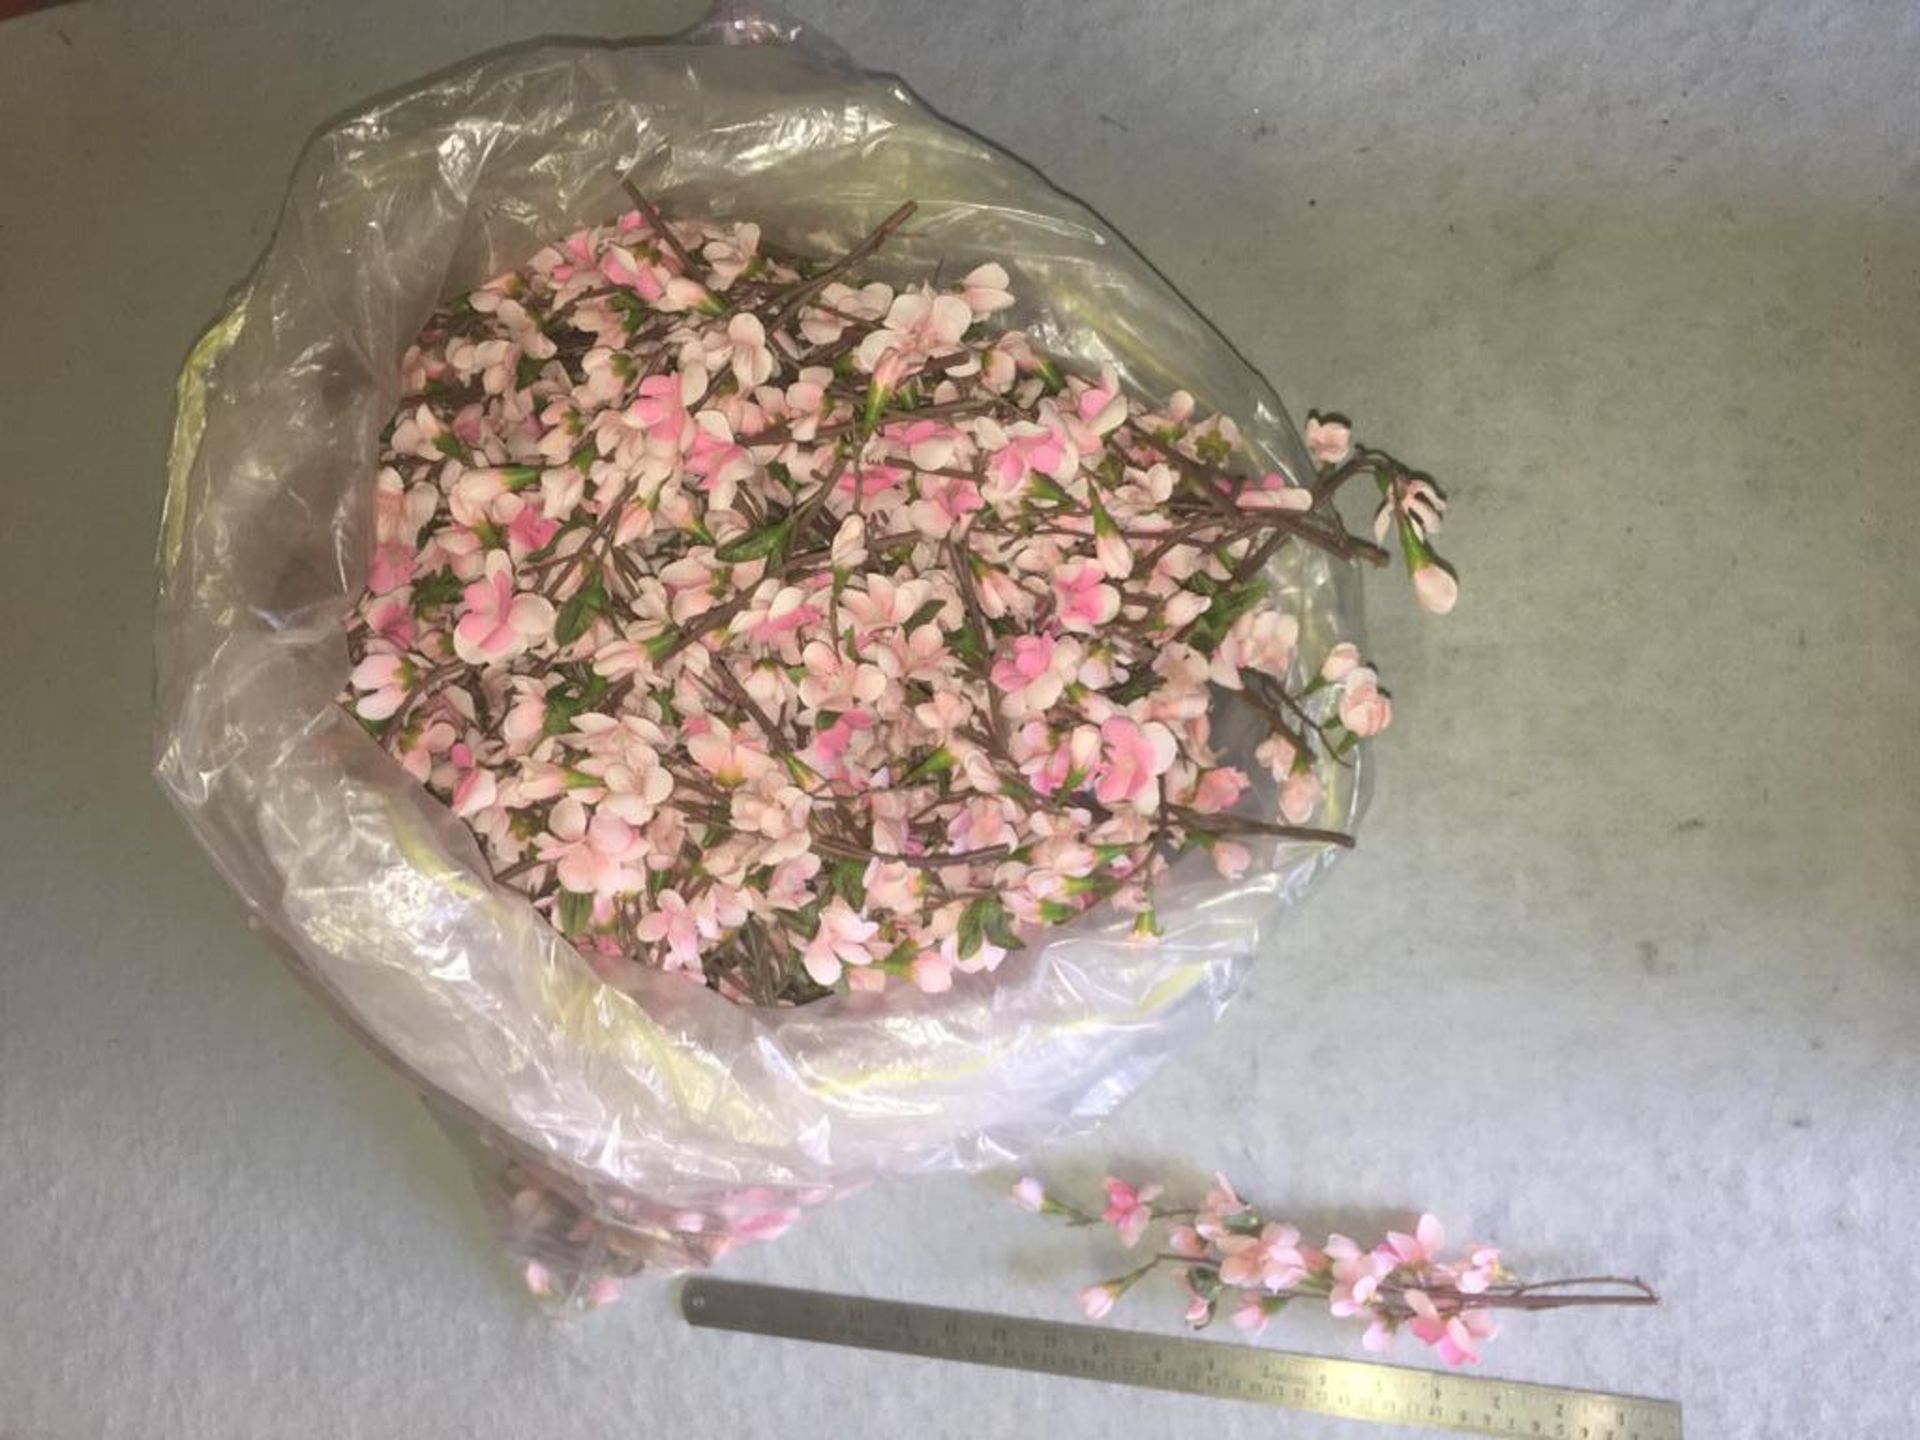 1 x 90 ltr bag of Artificial Blossom - pink single flower - cut to various lengths - good condition